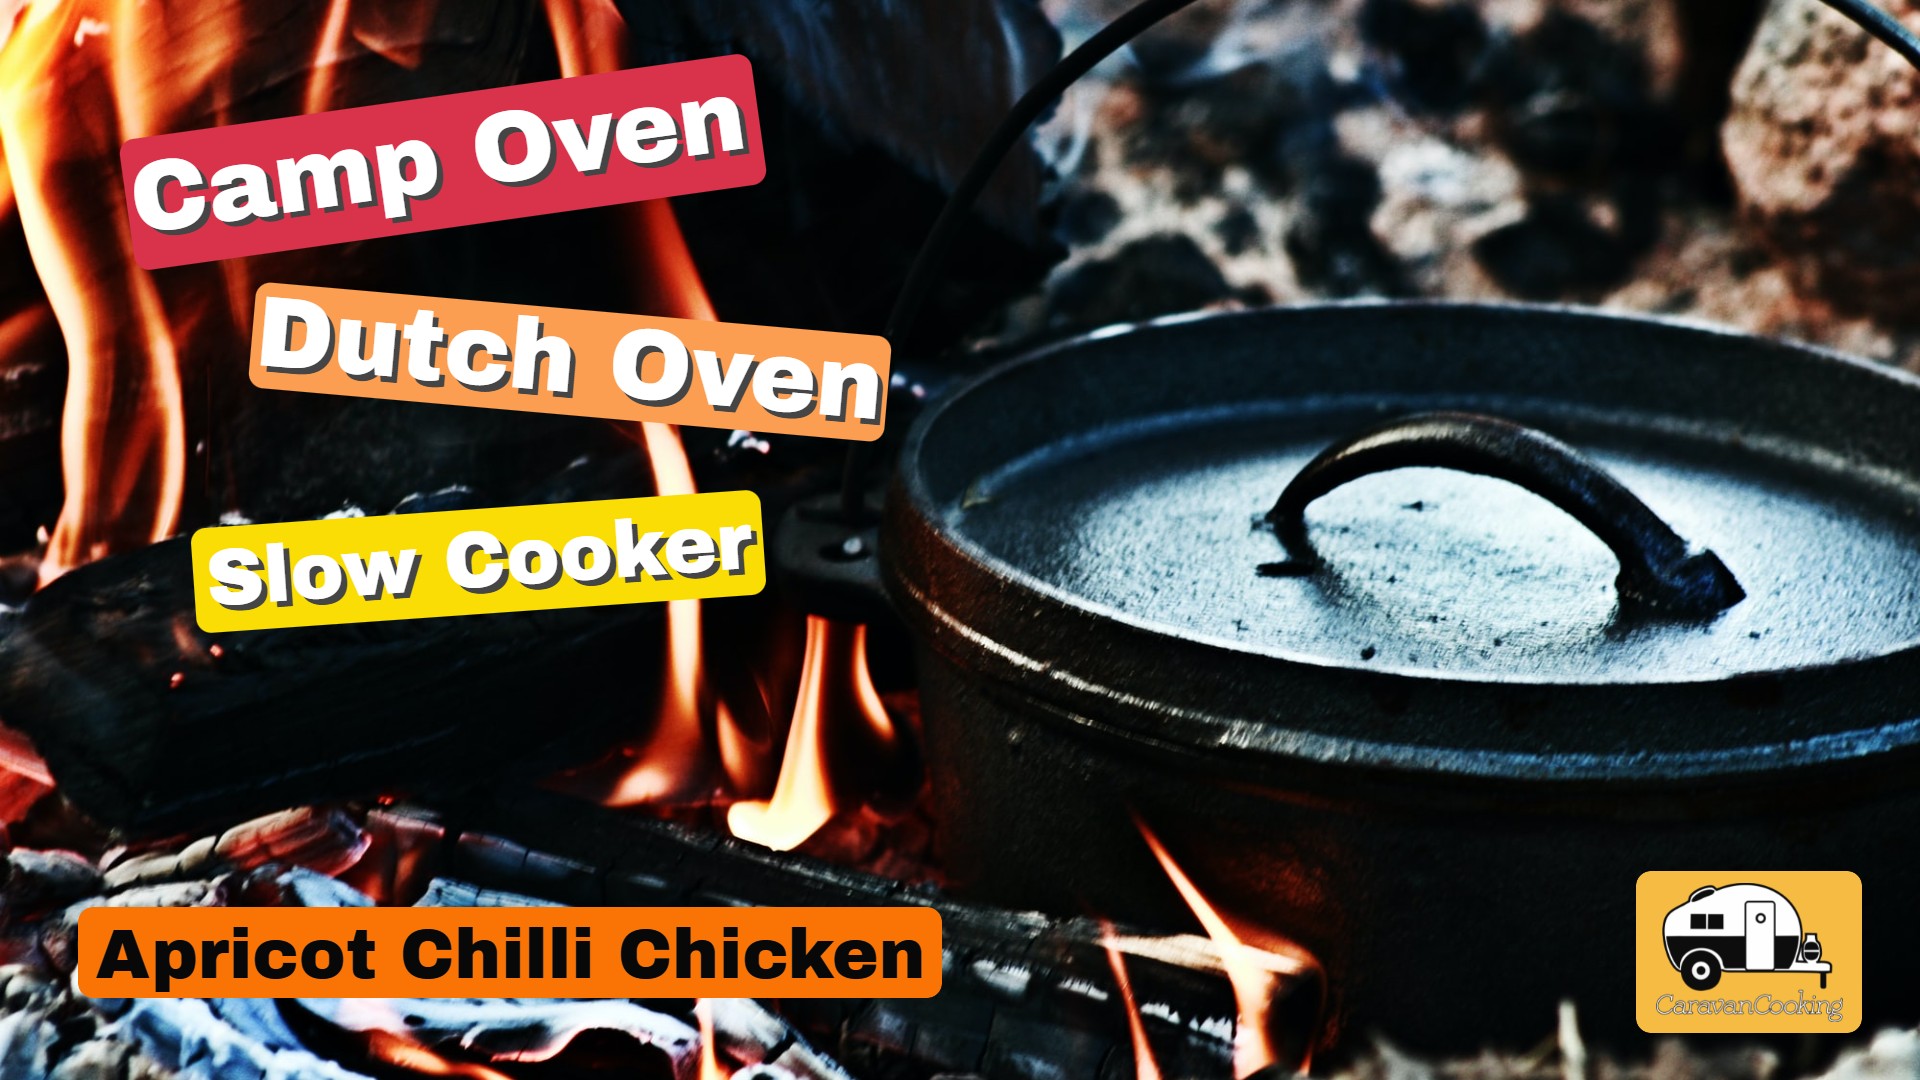 Camp Oven / Dutch Oven / Slow Cooker Apricot Chilli Chicken